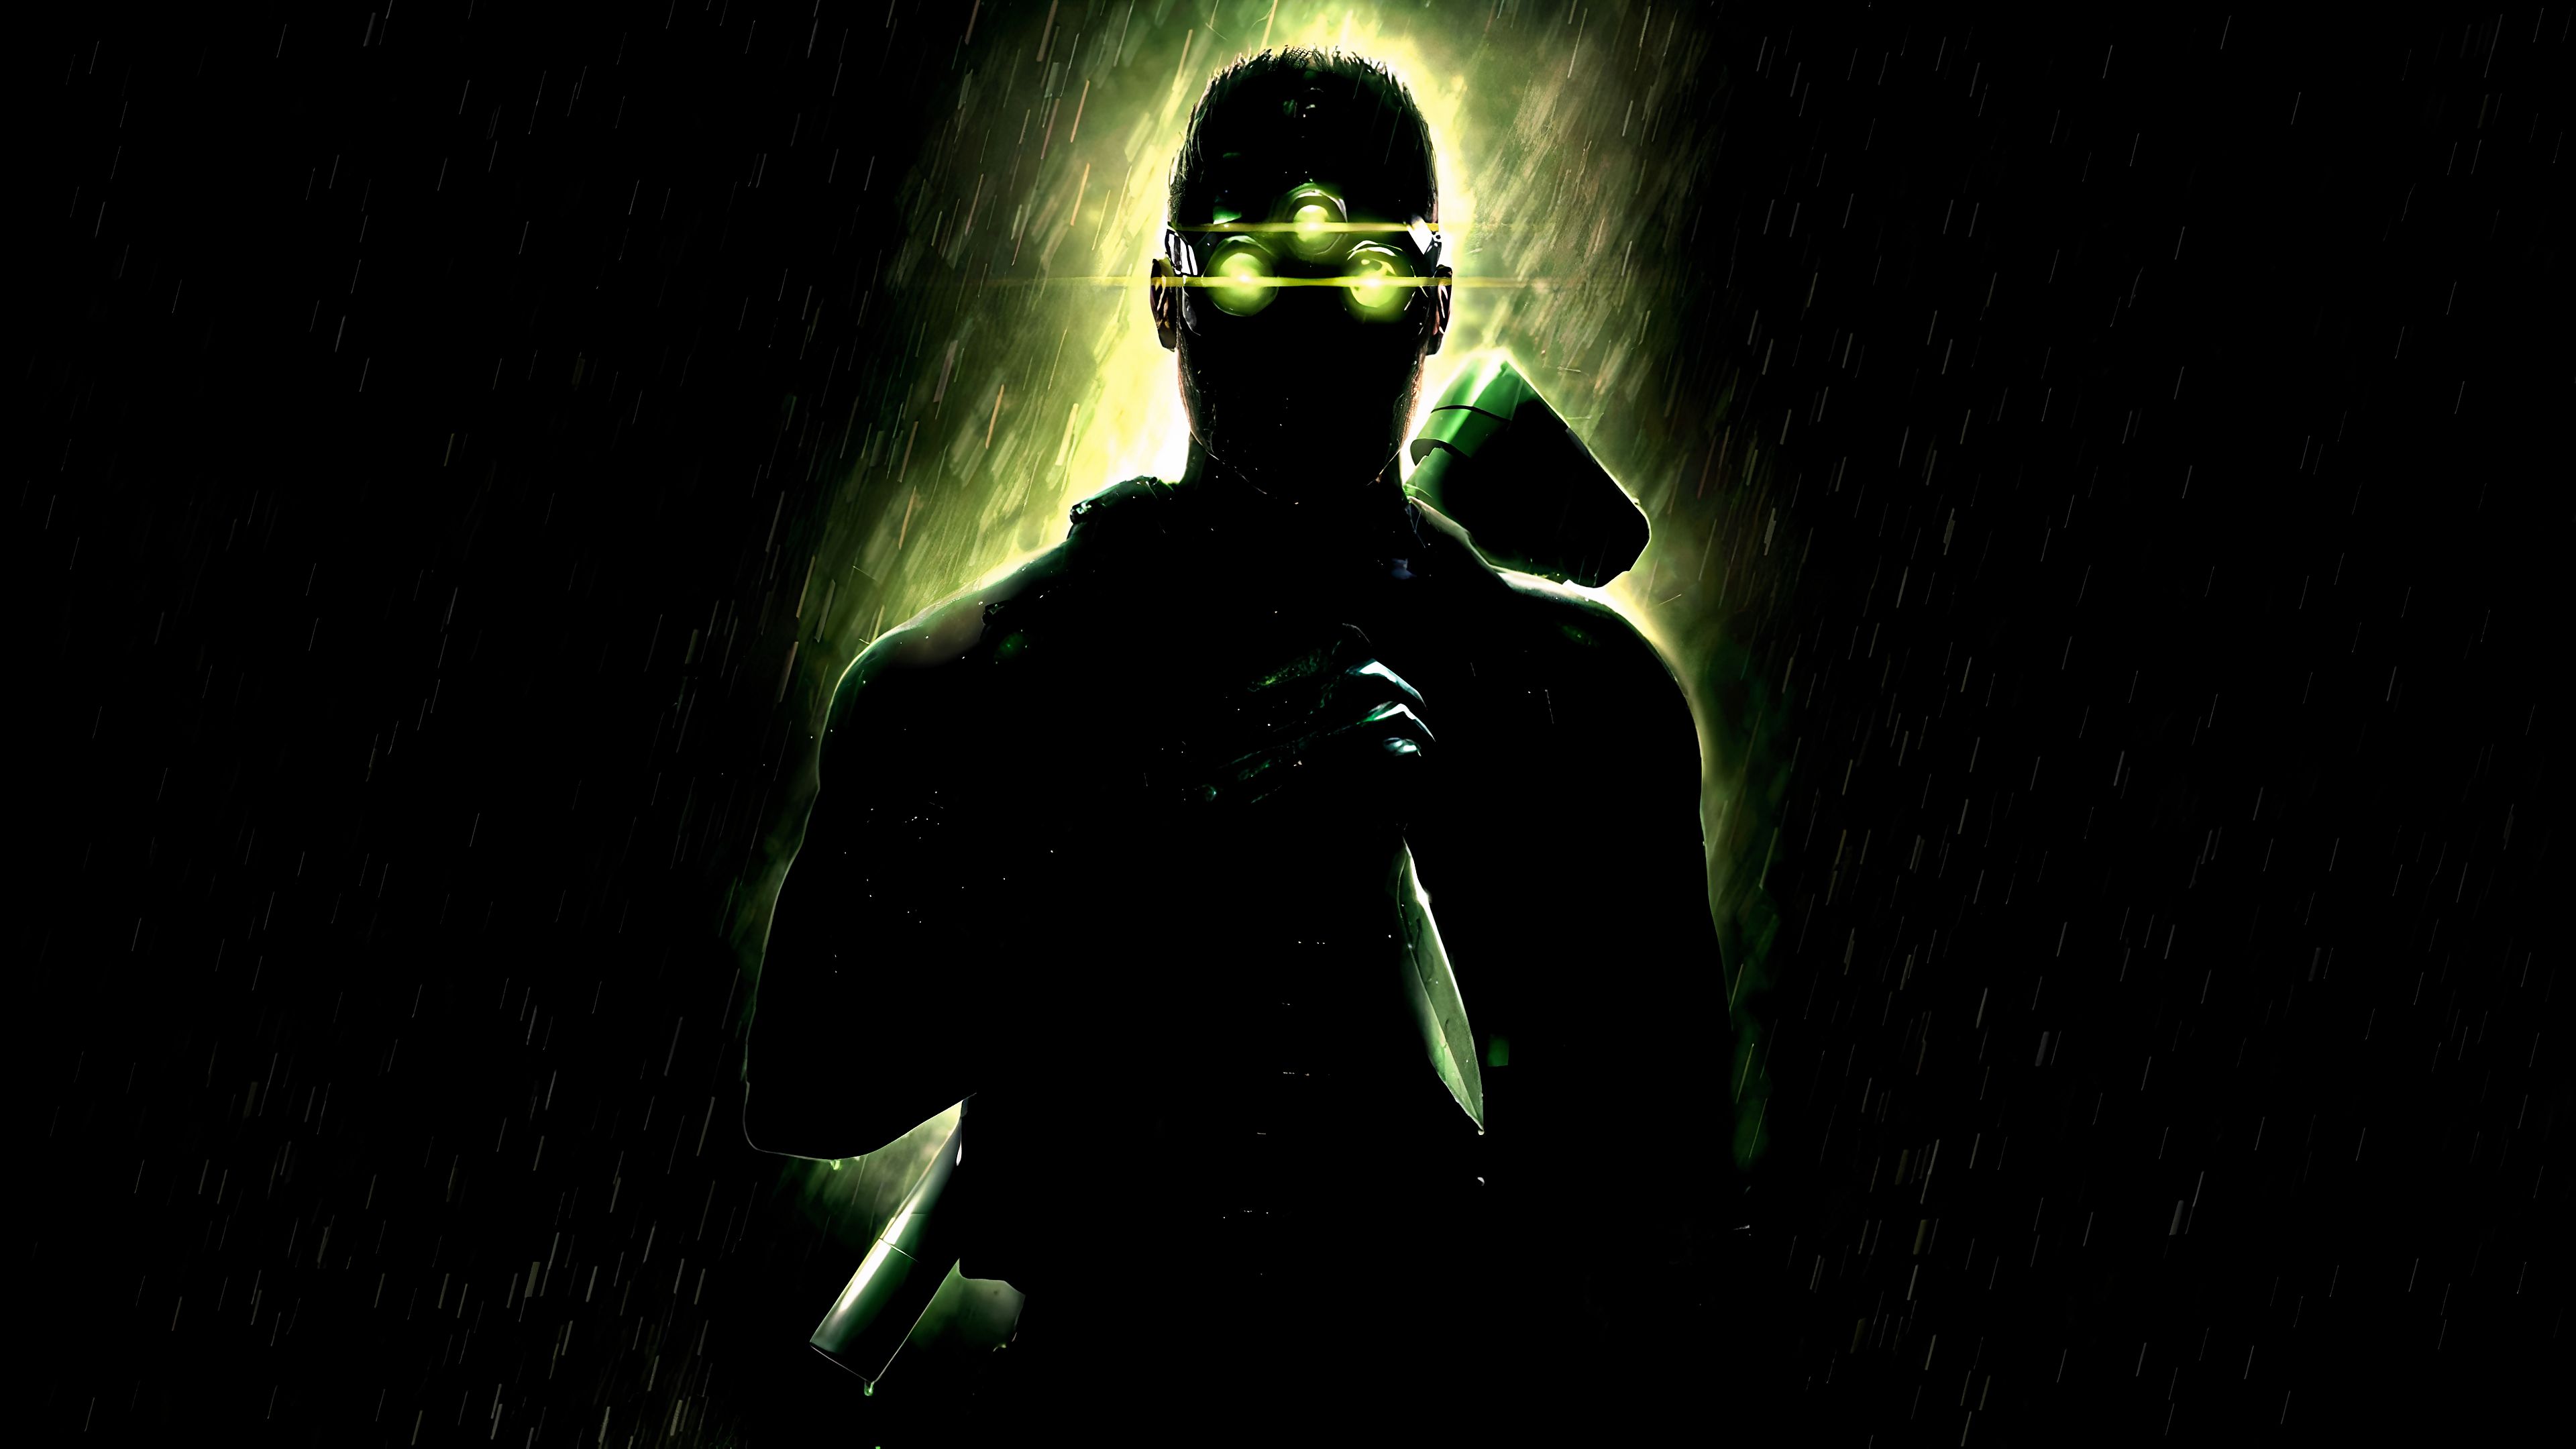 splinter cell chaos theory, tom clancy's splinter cell: chaos theory, video game, tom clancy's